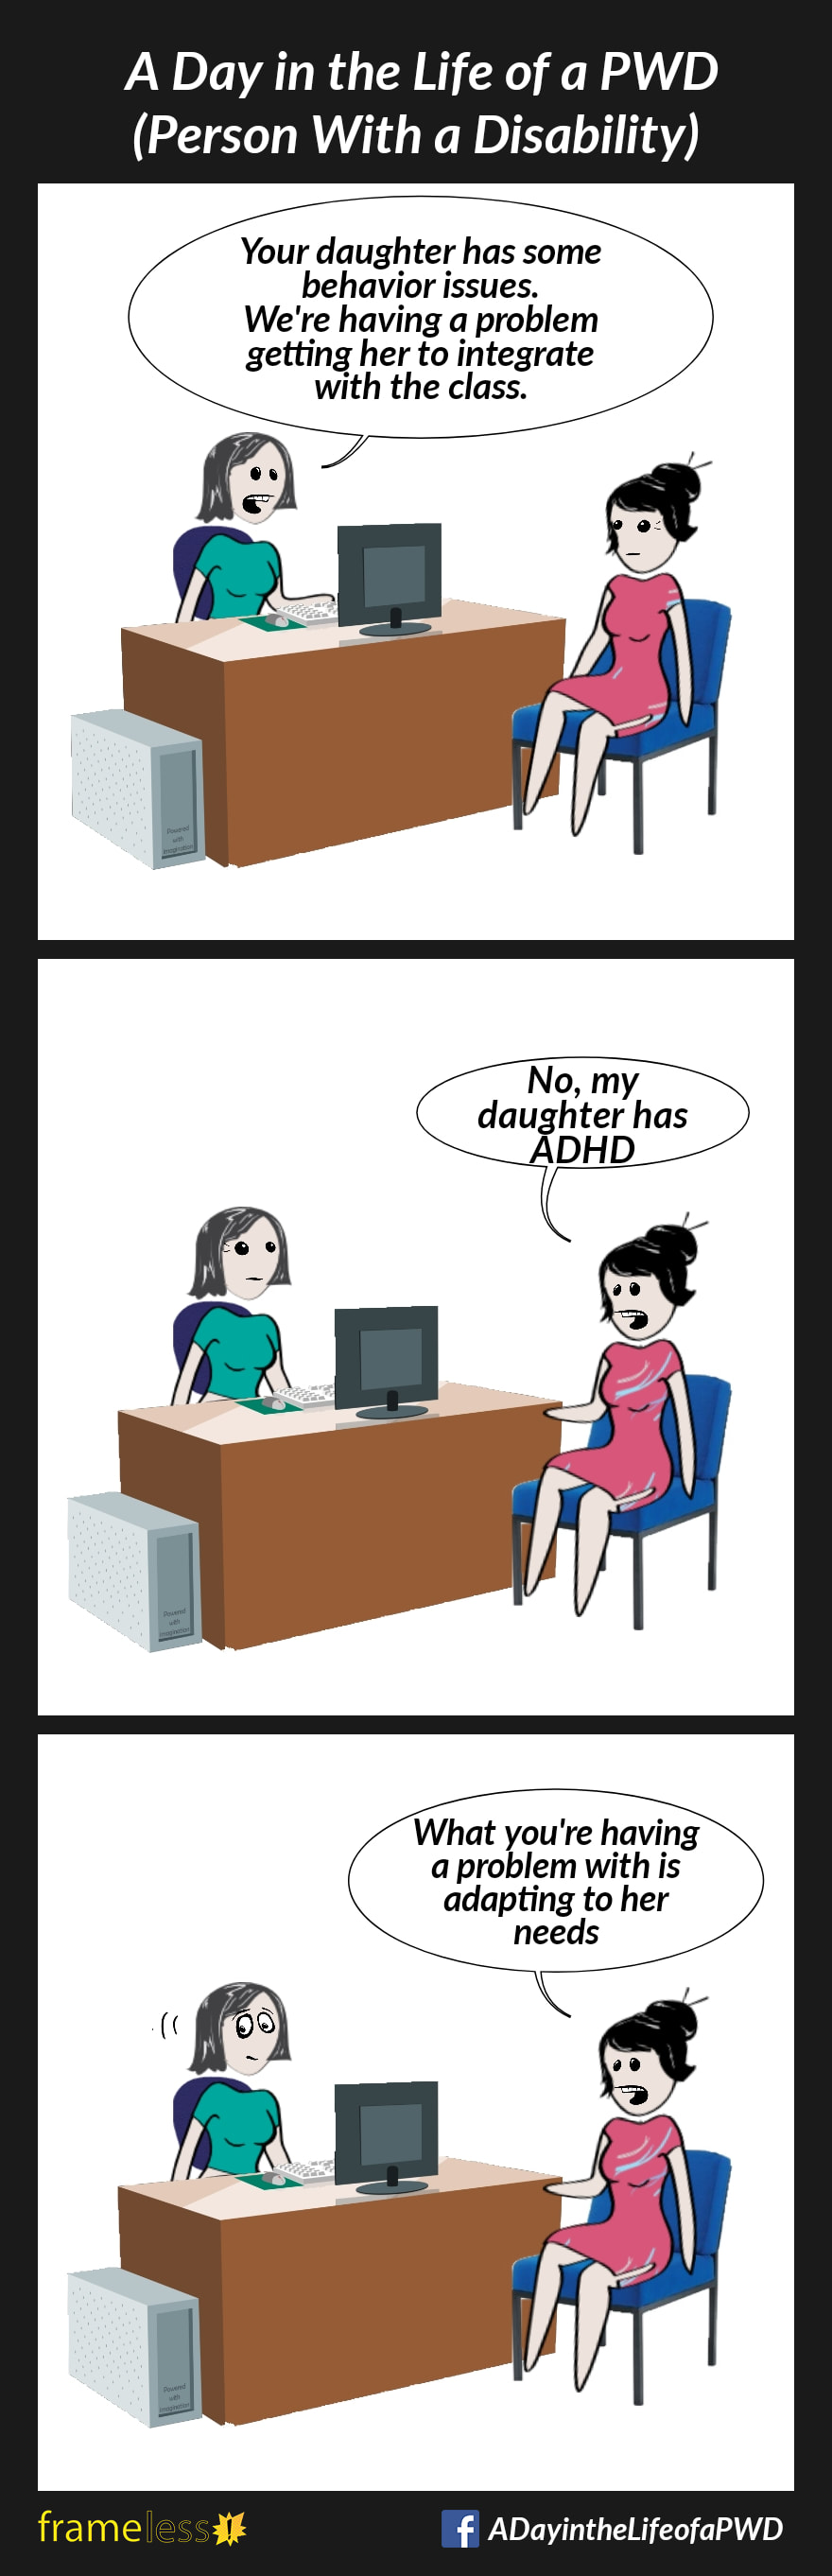 COMIC STRIP 
A Day in the Life of a PWD (Person With a Disability) 

Frame 1:
A mother is in a meeting with a teacher who sits behind her desk. 
TEACHER: Your daughter has some behavior issues. We are having a problem getting her to integrate with the class.

Frame 2:
MOTHER: No, my daughter has ADHD

Frame 3:
MOTHER: What you're having a problem with is adapting to her needs.